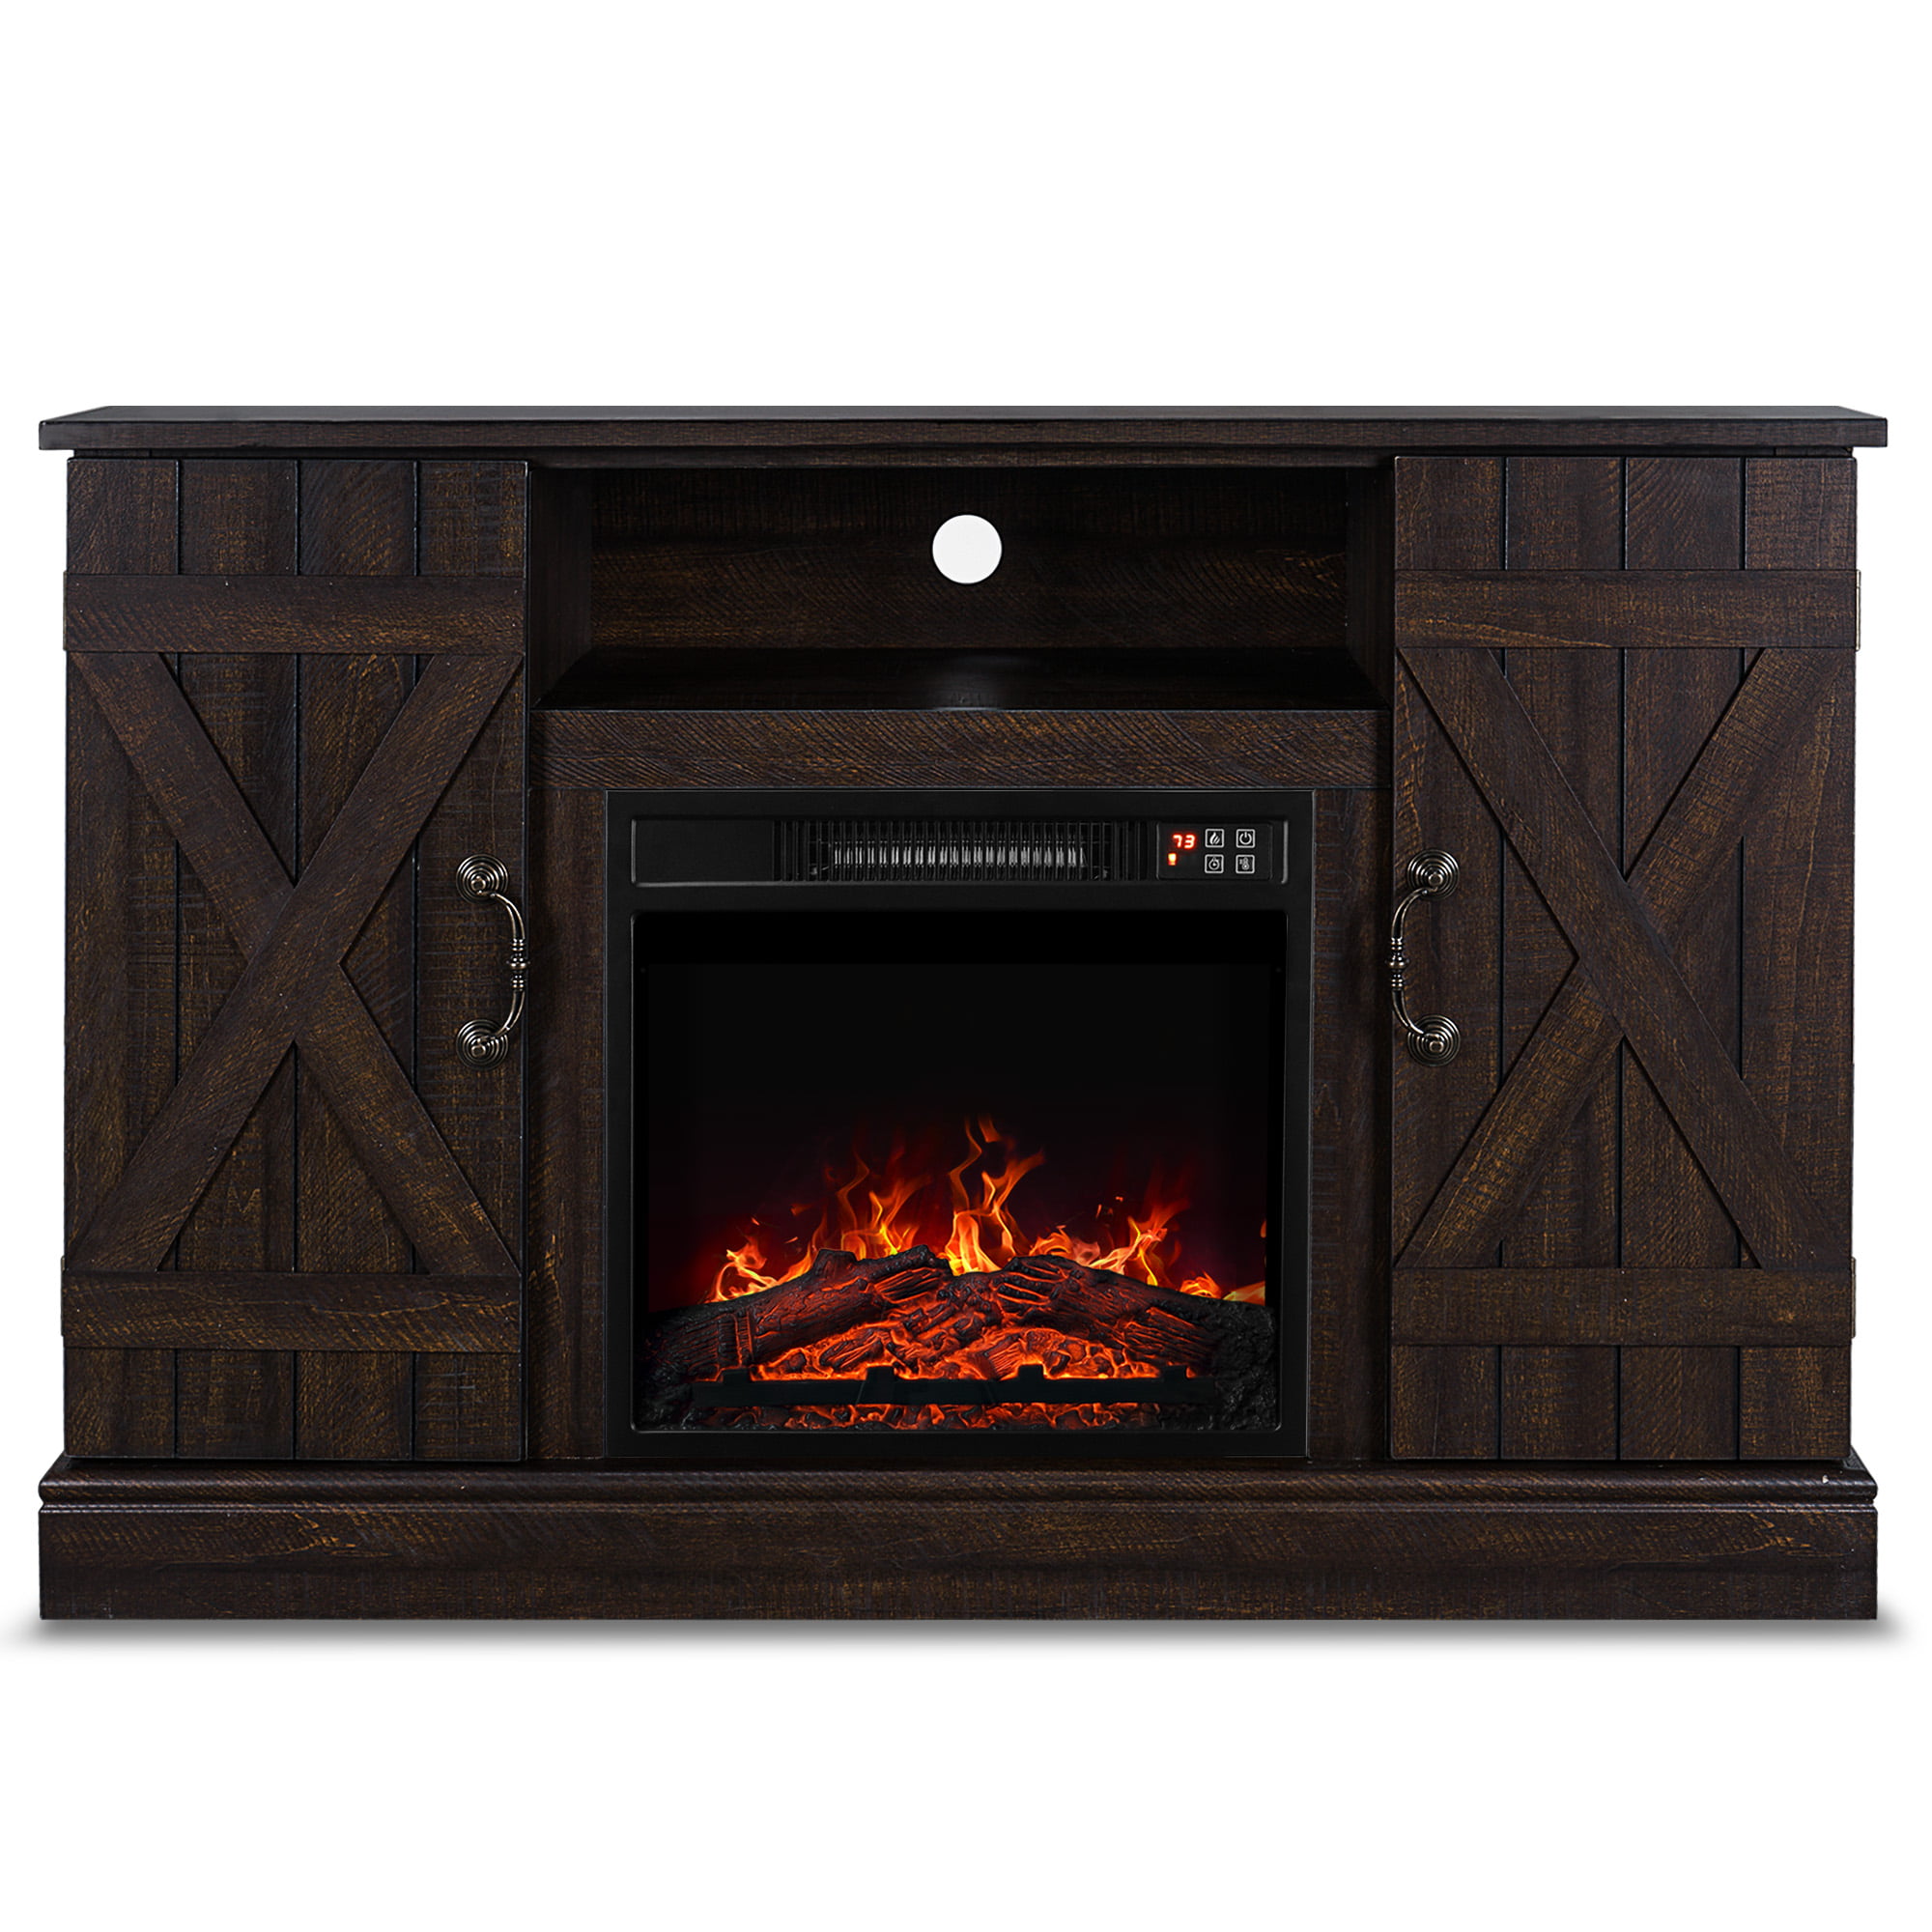 BELLEZE Infrared Electric Fireplace TV Stand Entertainment